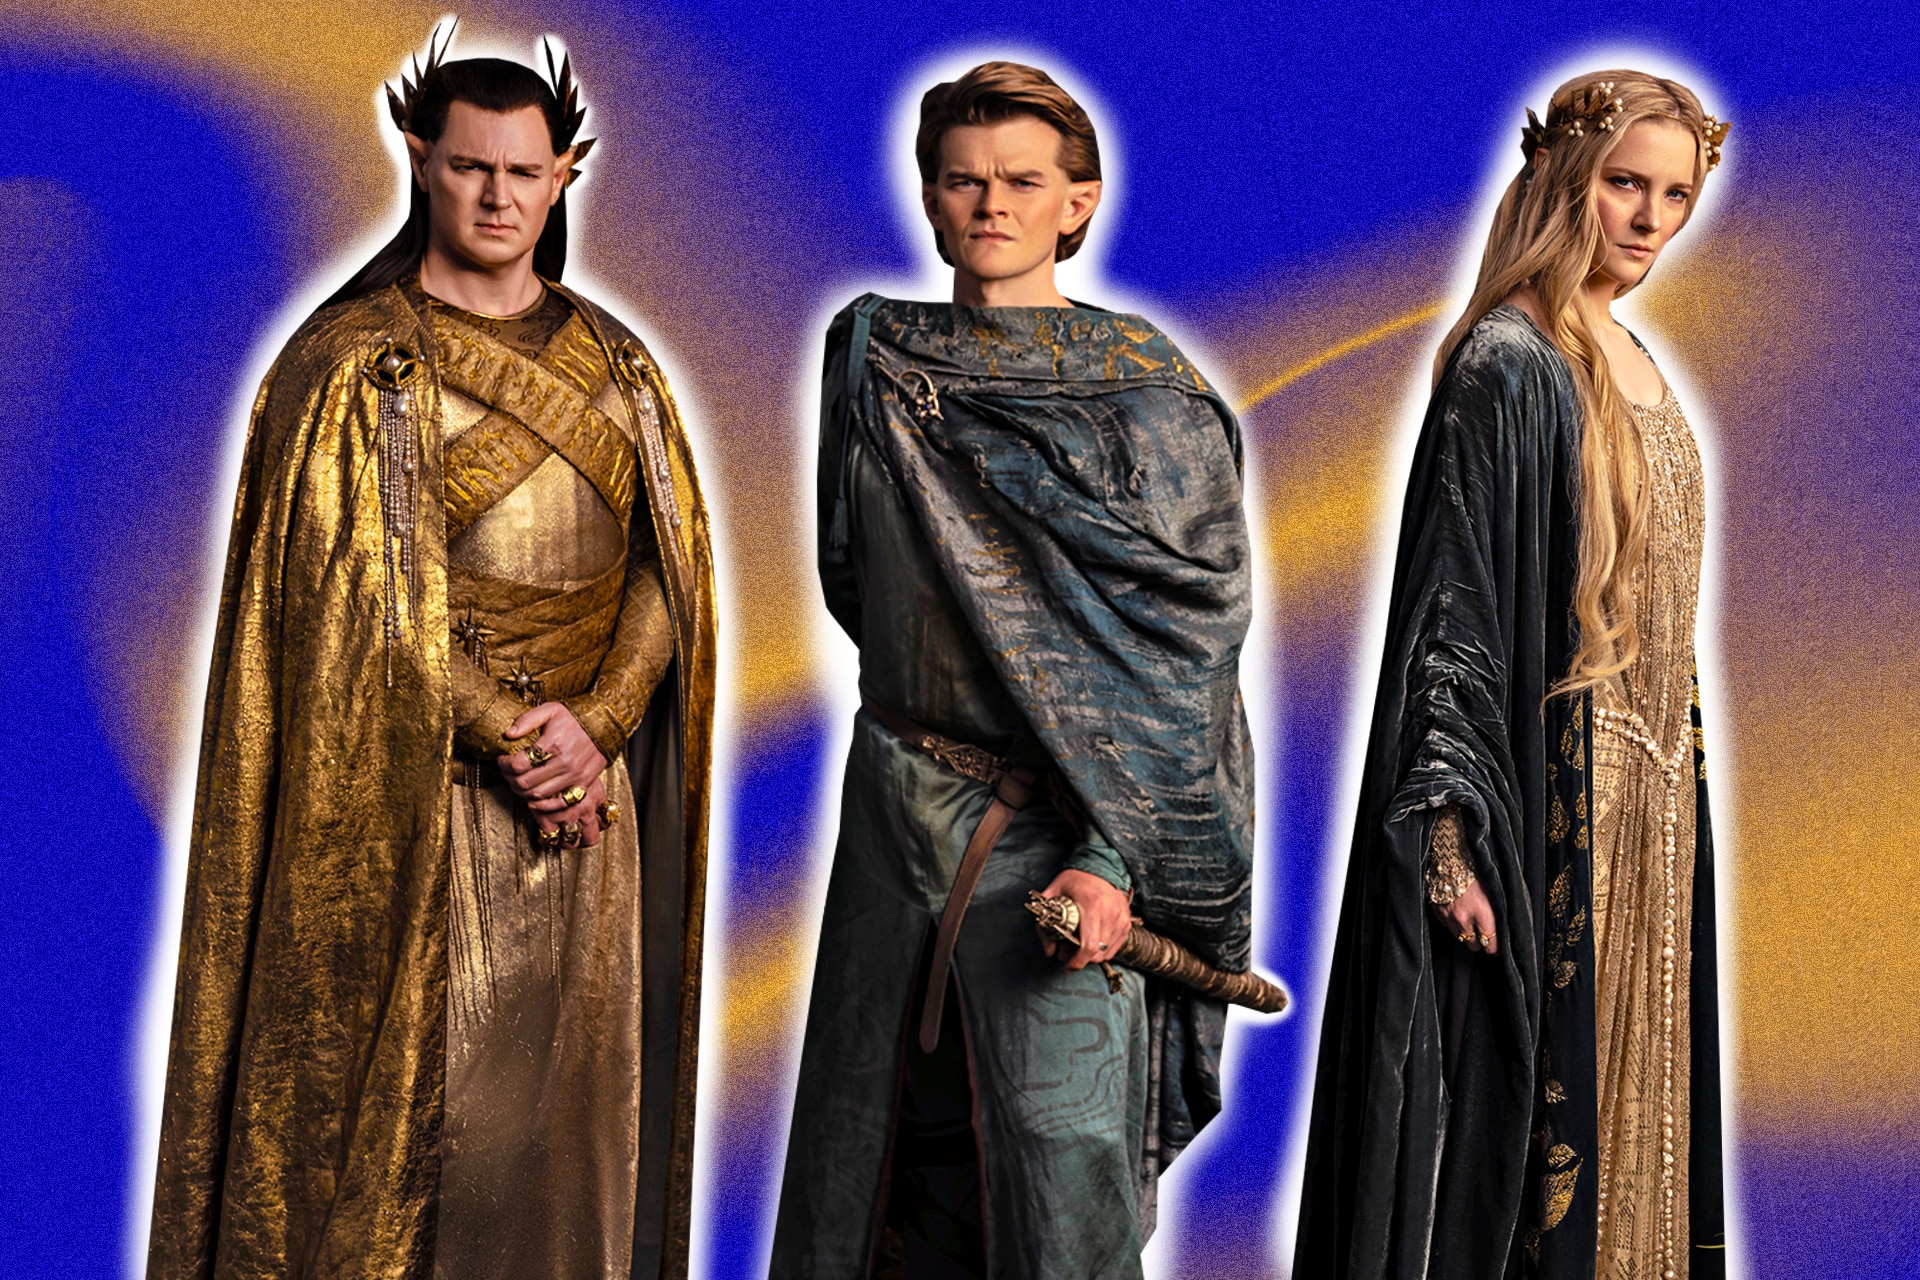 Lord of the Rings: The Rings of Power' Character Guide From Elrond to Nori